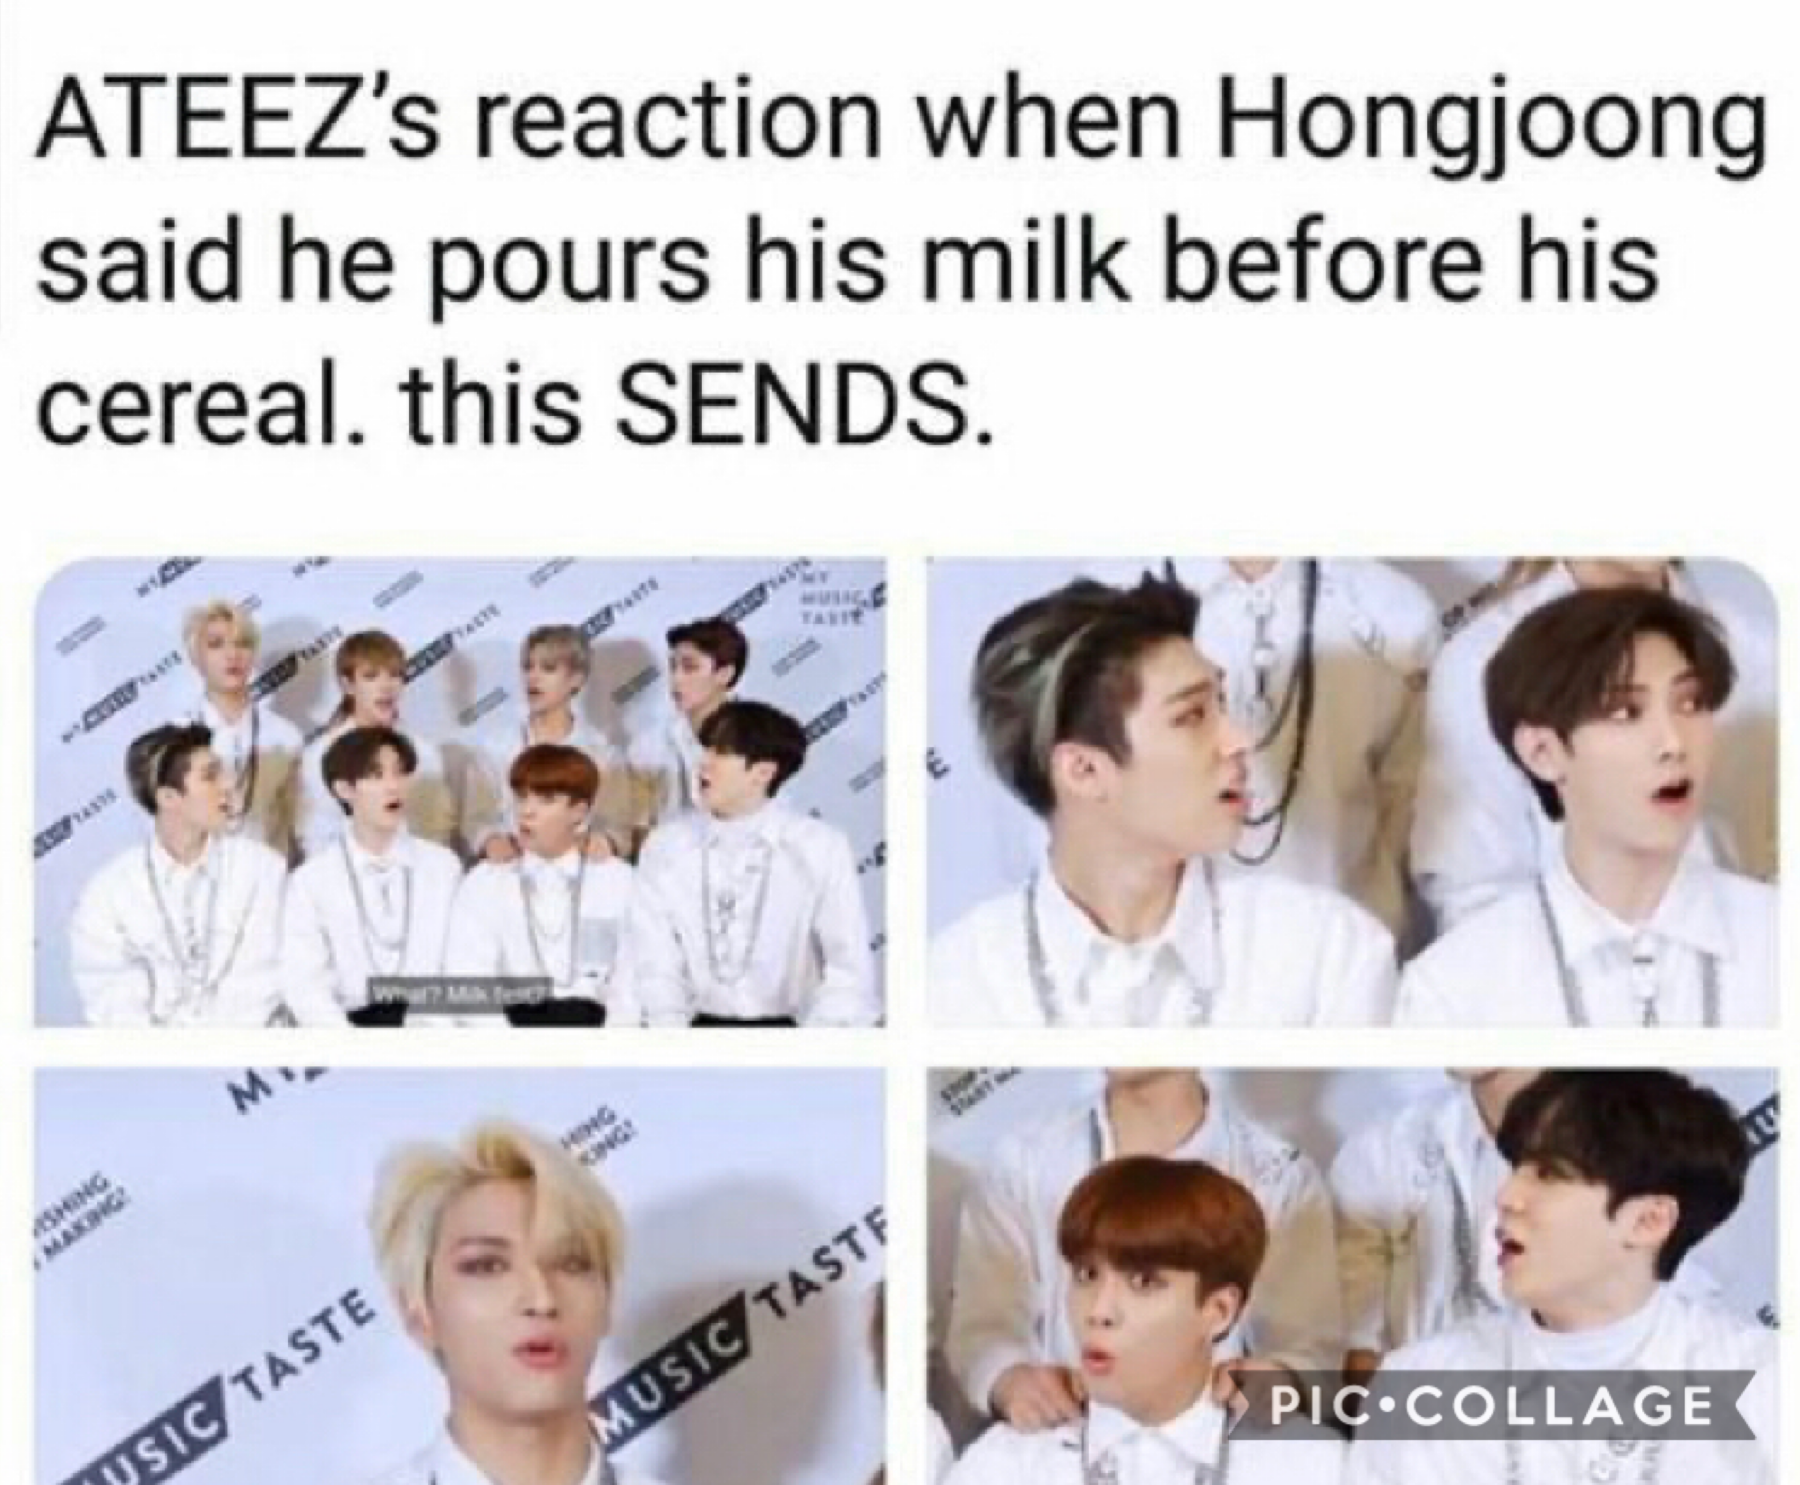 hongjoong😭😭 how could you😭